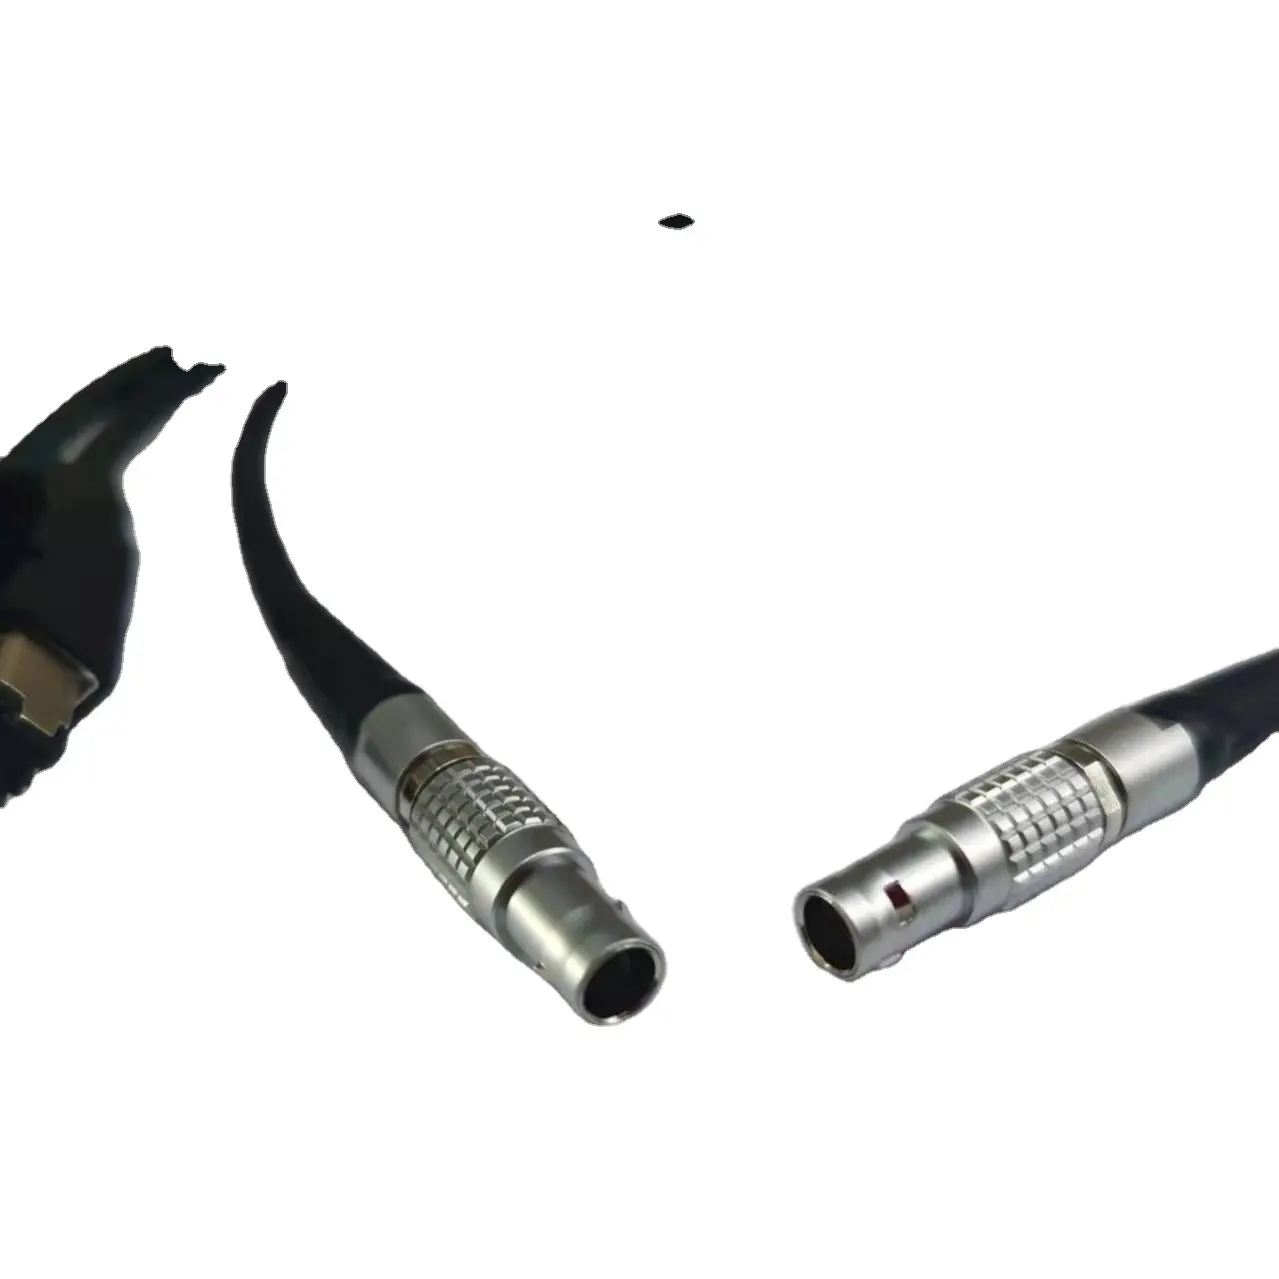 Factory high quality B series push-pull connector with cable conector camara mirilla puerta